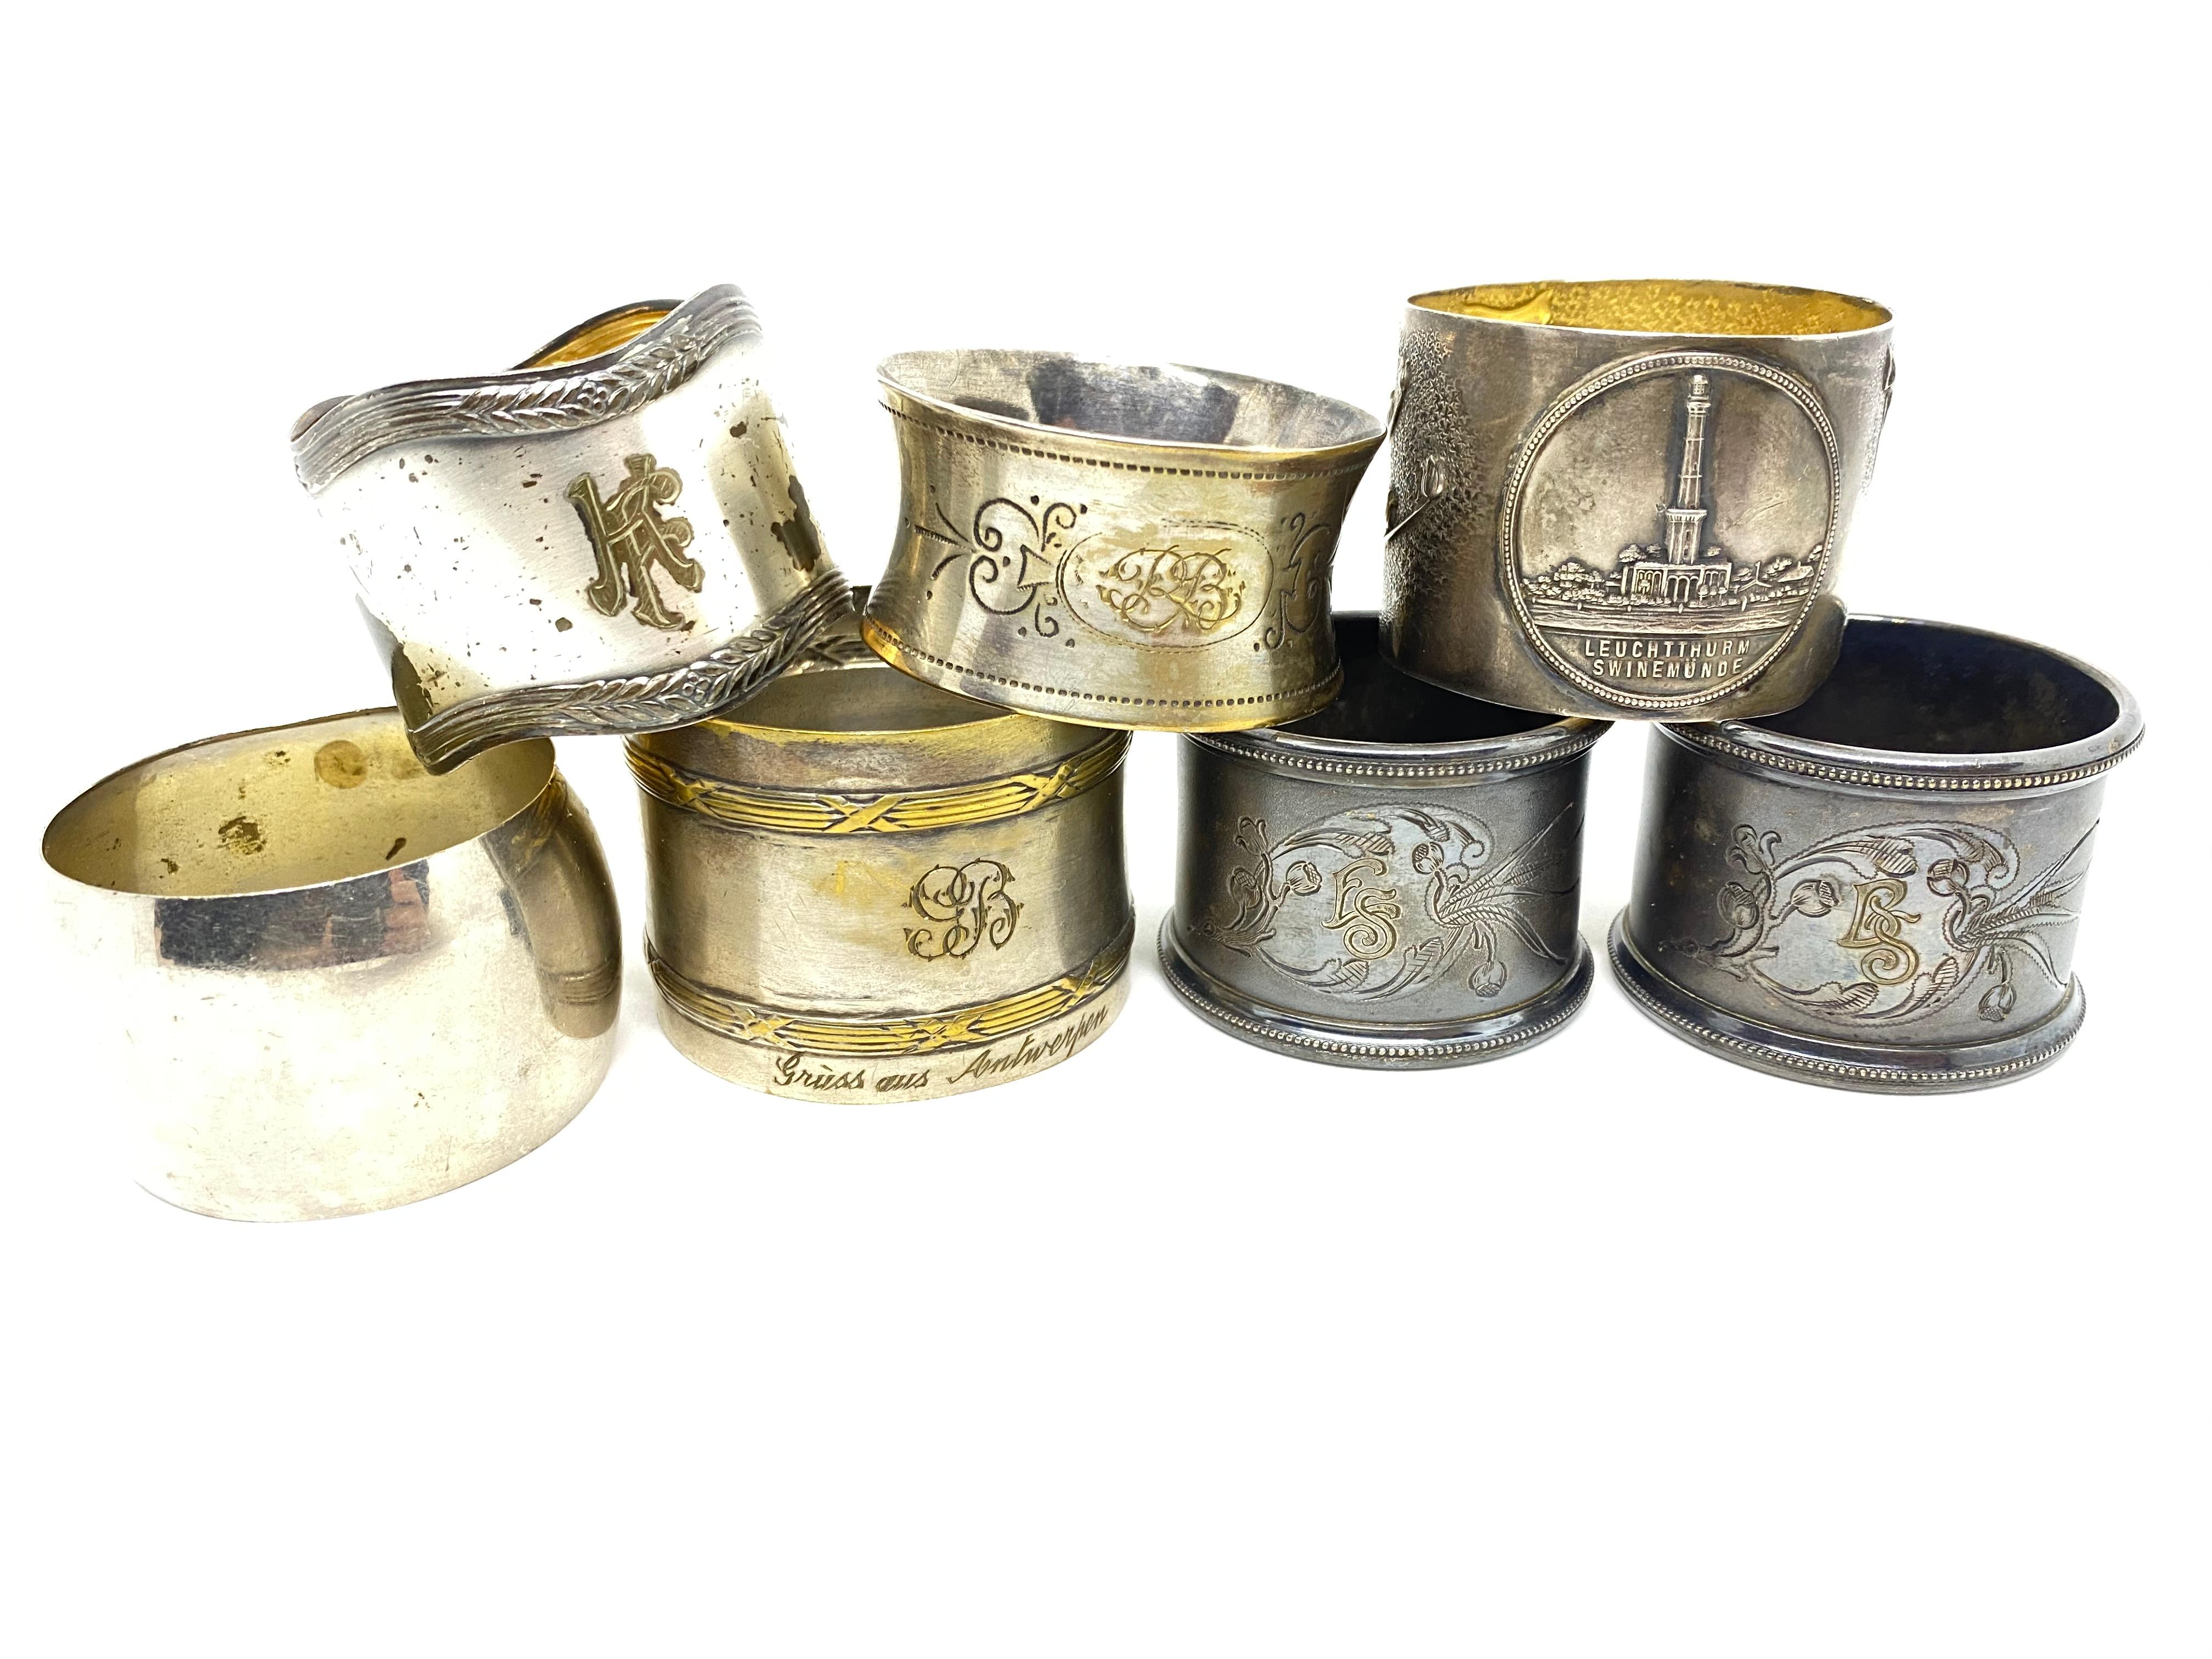 A mixed set of seven silver plated napkin rings, circa 1910-1930s, various makers. A nice selection of barrel, rectangular, paneled and round rings, one Art Nouveau, one with Lighthouse, all engraved with letters (monogram), ranging in size from 1.5